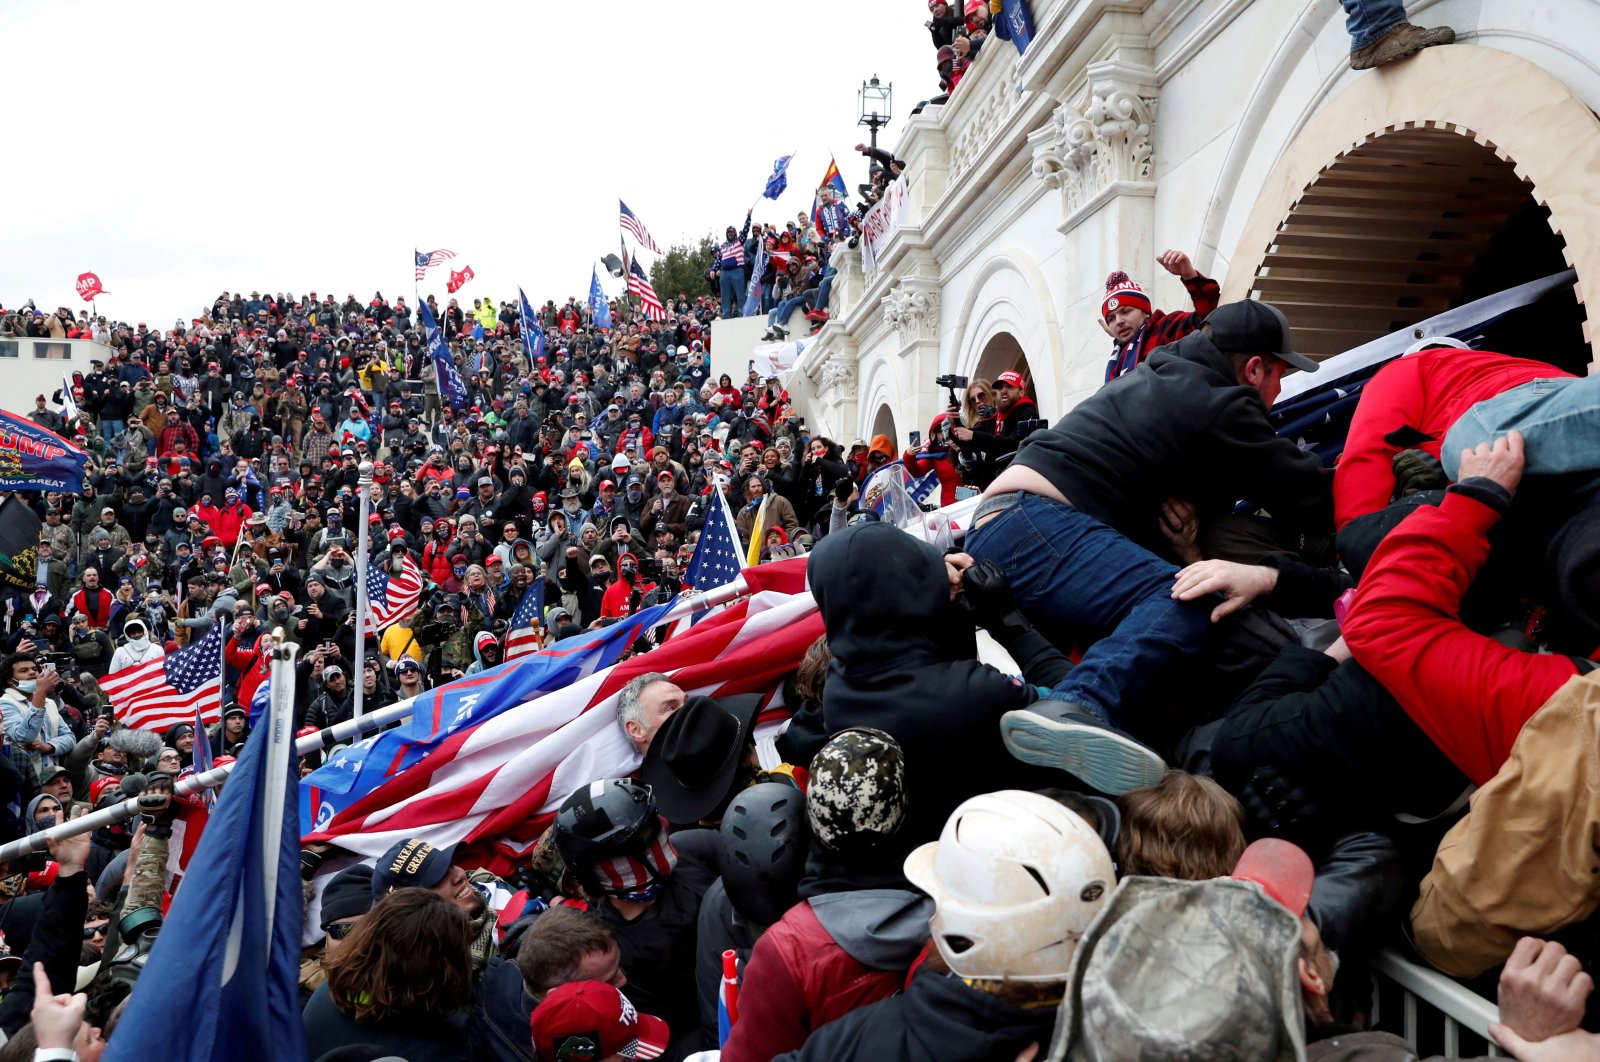 Pro-Trump protesters storm the U.S. Capitol during a rally to contest the certification of the 2020 U.S. presidential election results by the U.S. Congress, in Washington, D.C., U.S, Jan. 6, 2021. (Reuters Photo)